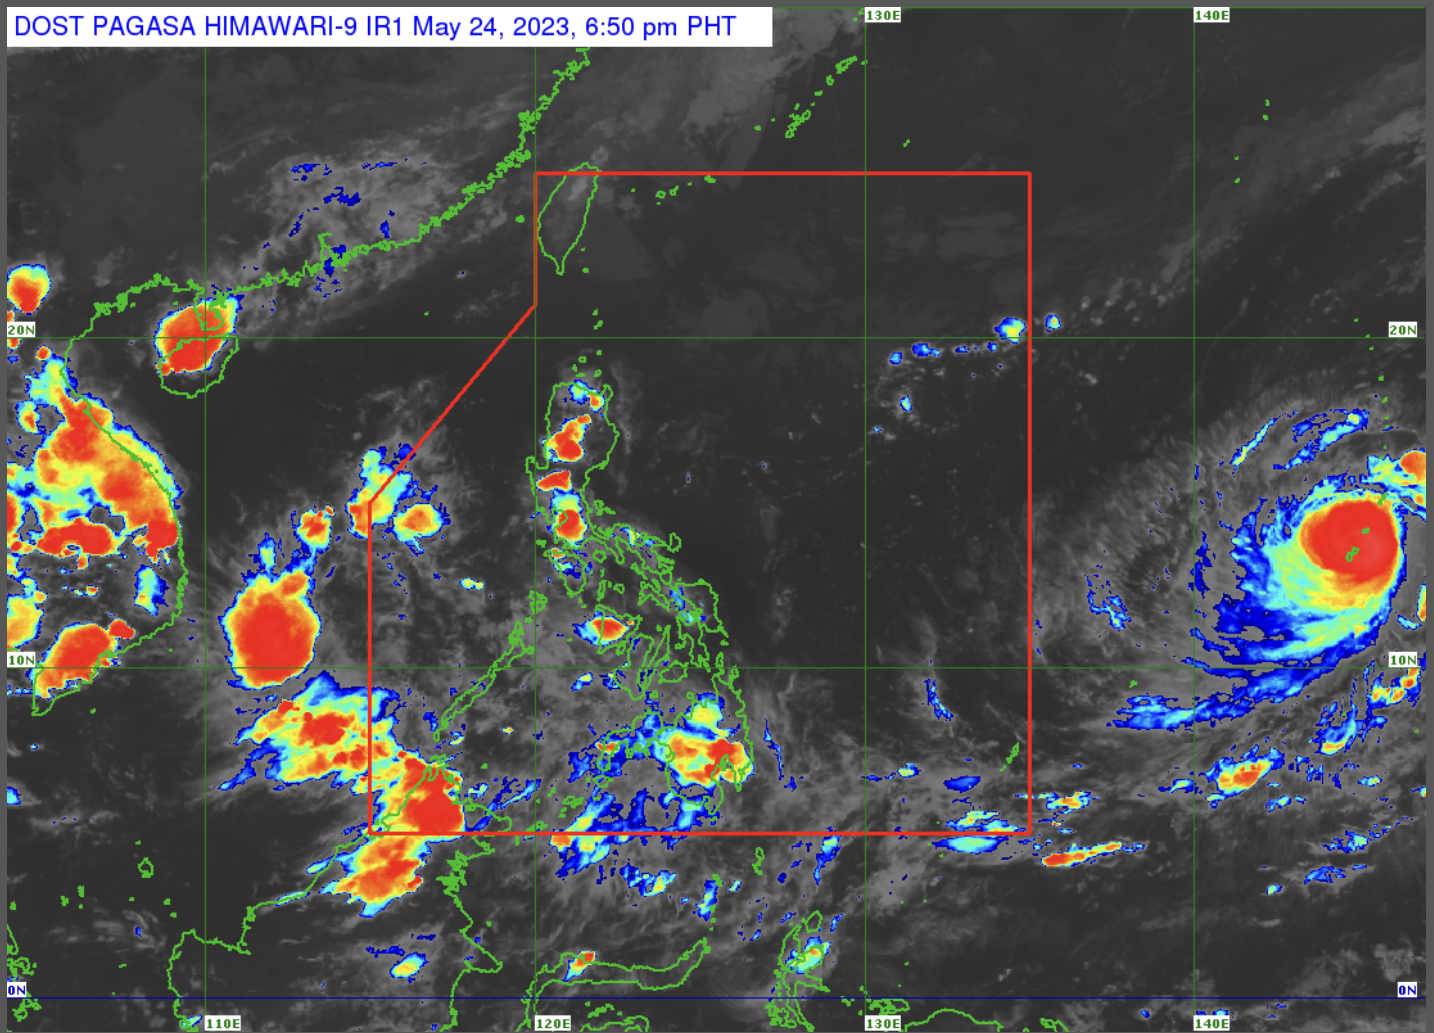 Satellite image of the location of typhoon Mawar.